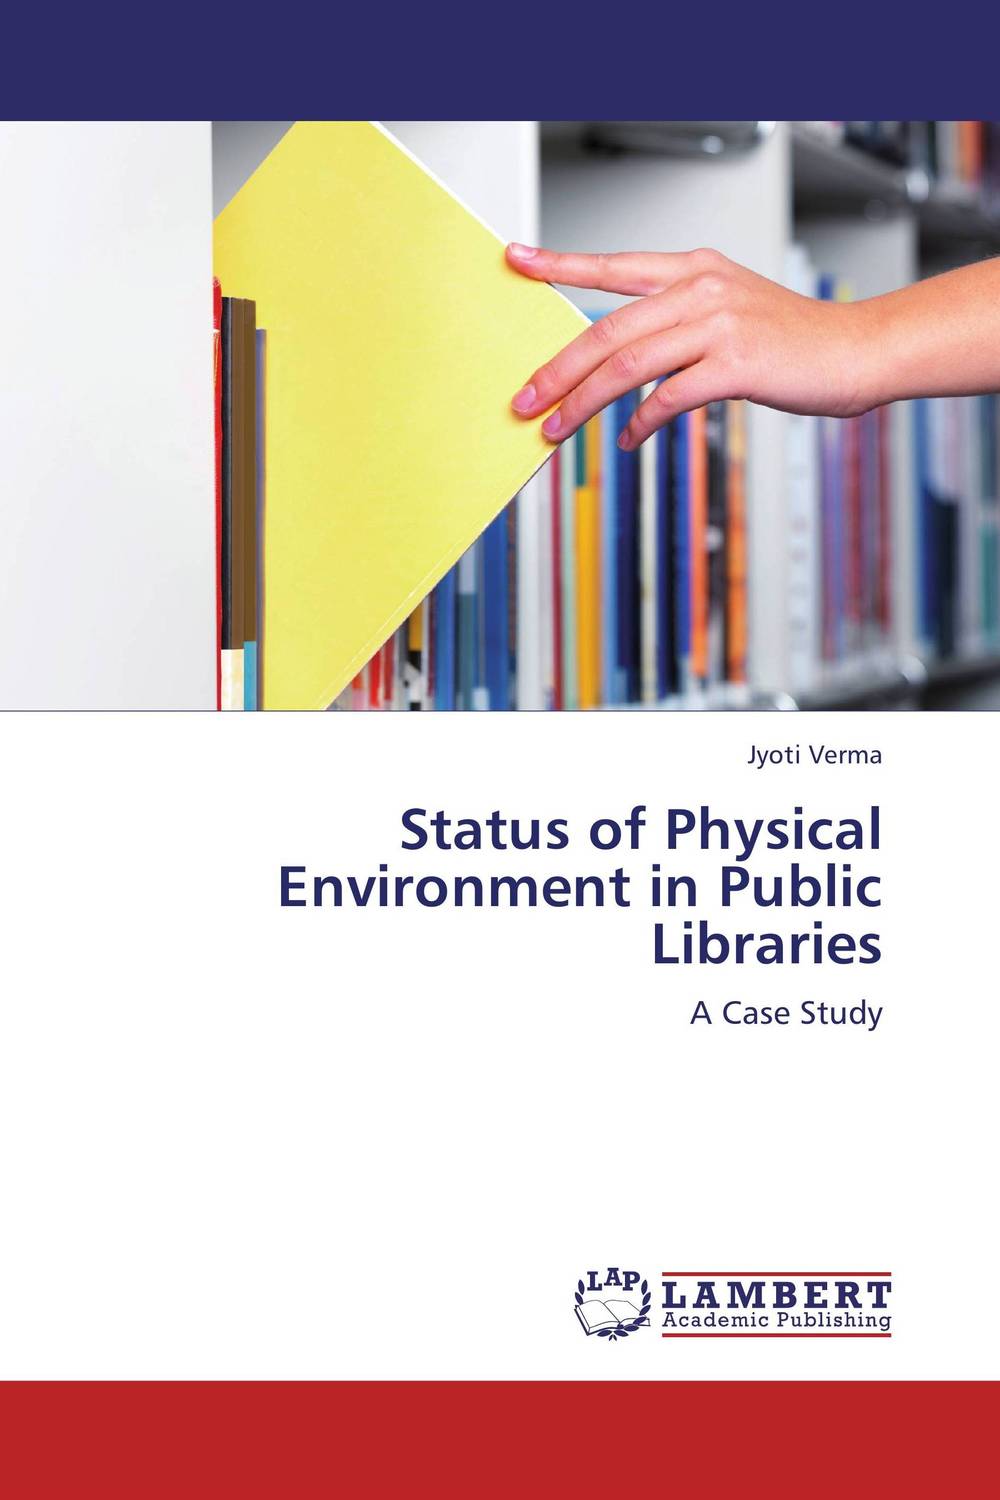 Status of Physical Environment in Public Libraries